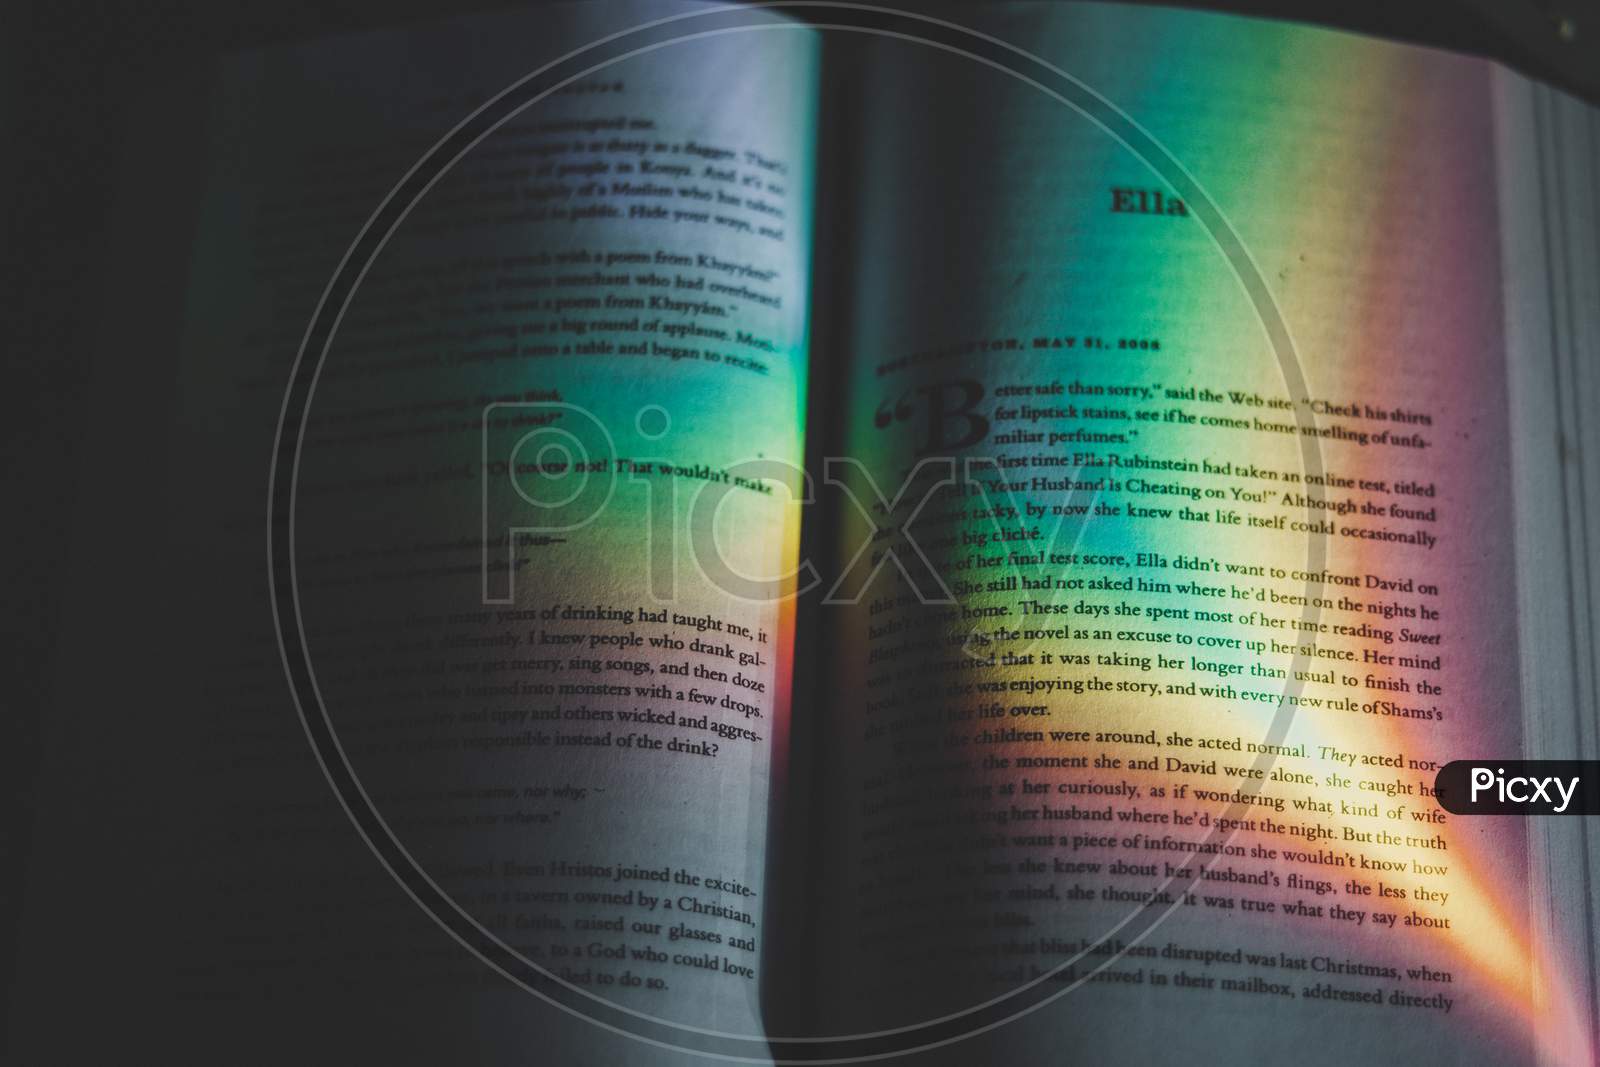 Giving the rainbow effect light to the Surface of the book